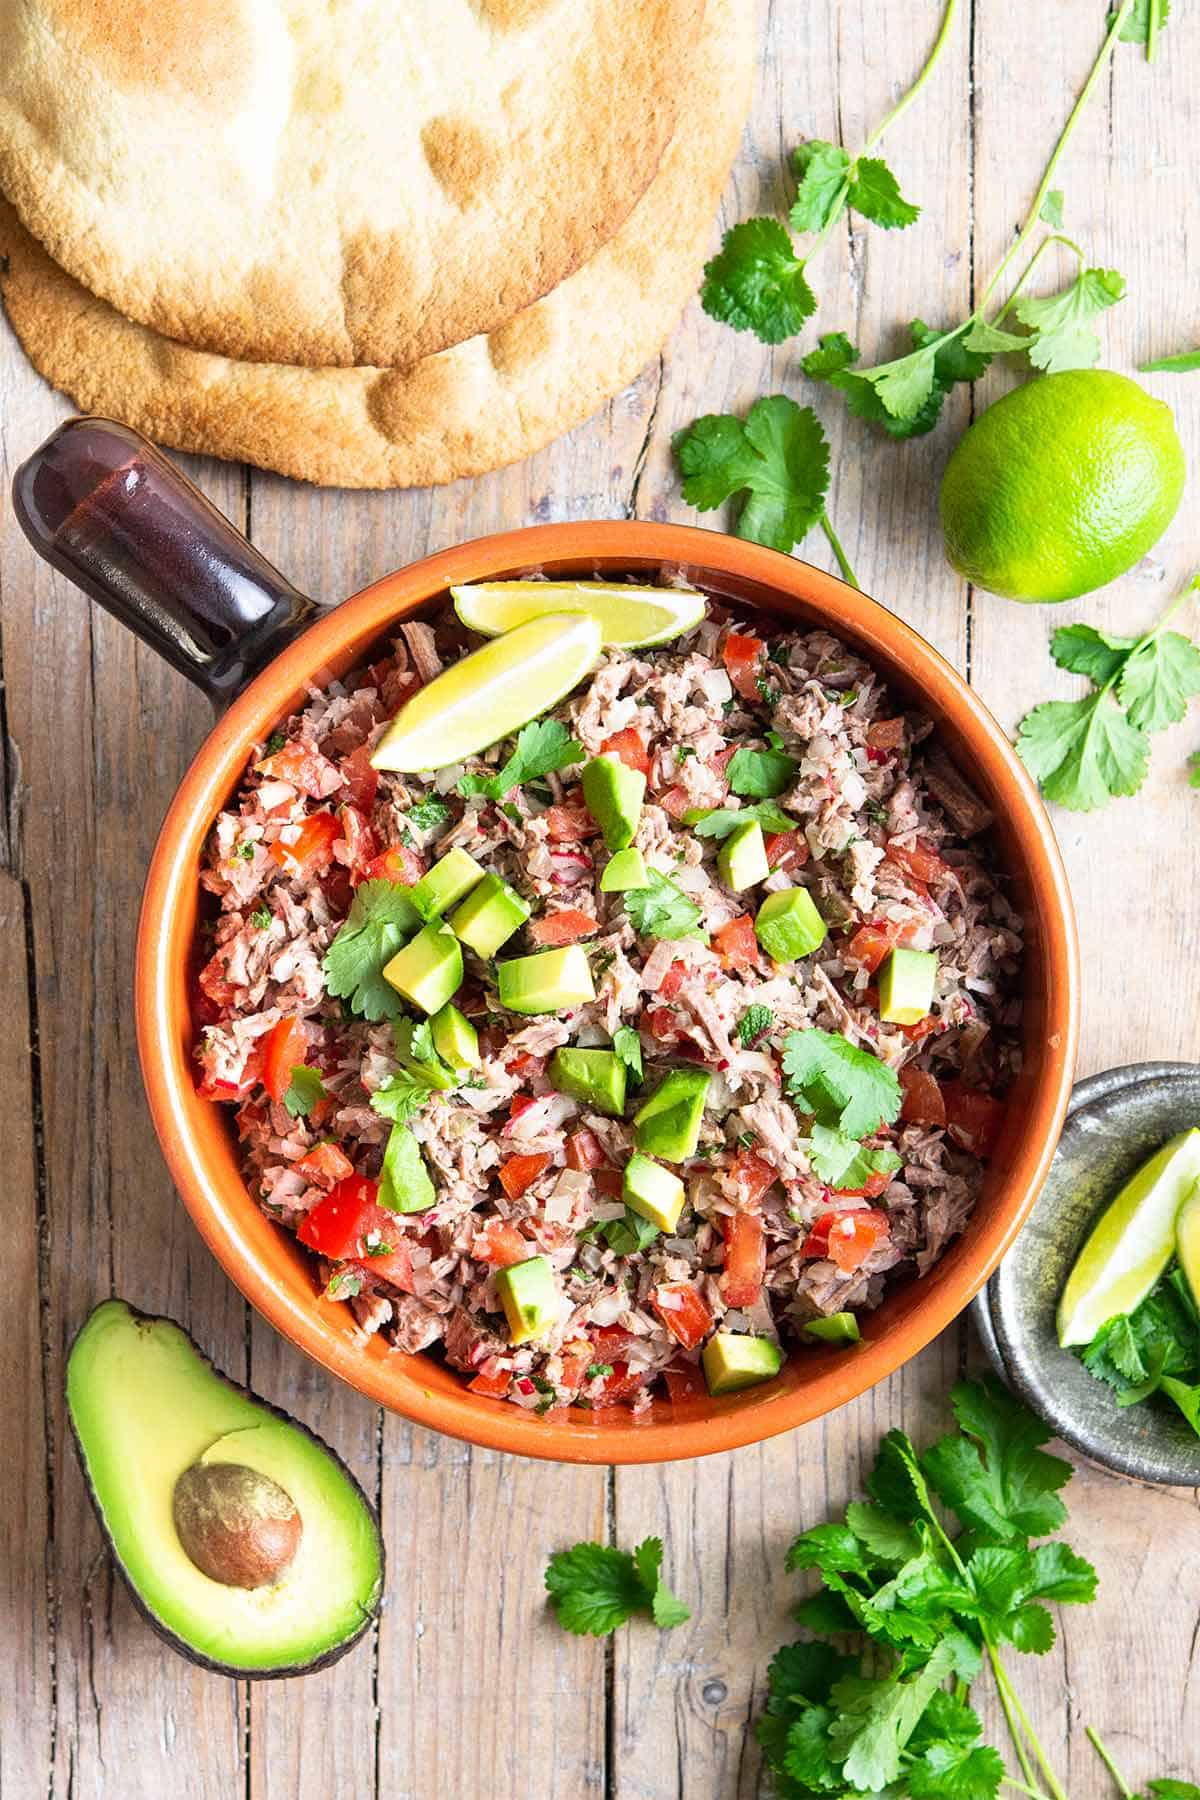 Shredded beef salad fashionable in Mexico and Guatemala proven in a bowl on a wooden table.  Salpicón: shredded beef and mint sa salpicon de res shredded beef salad 1